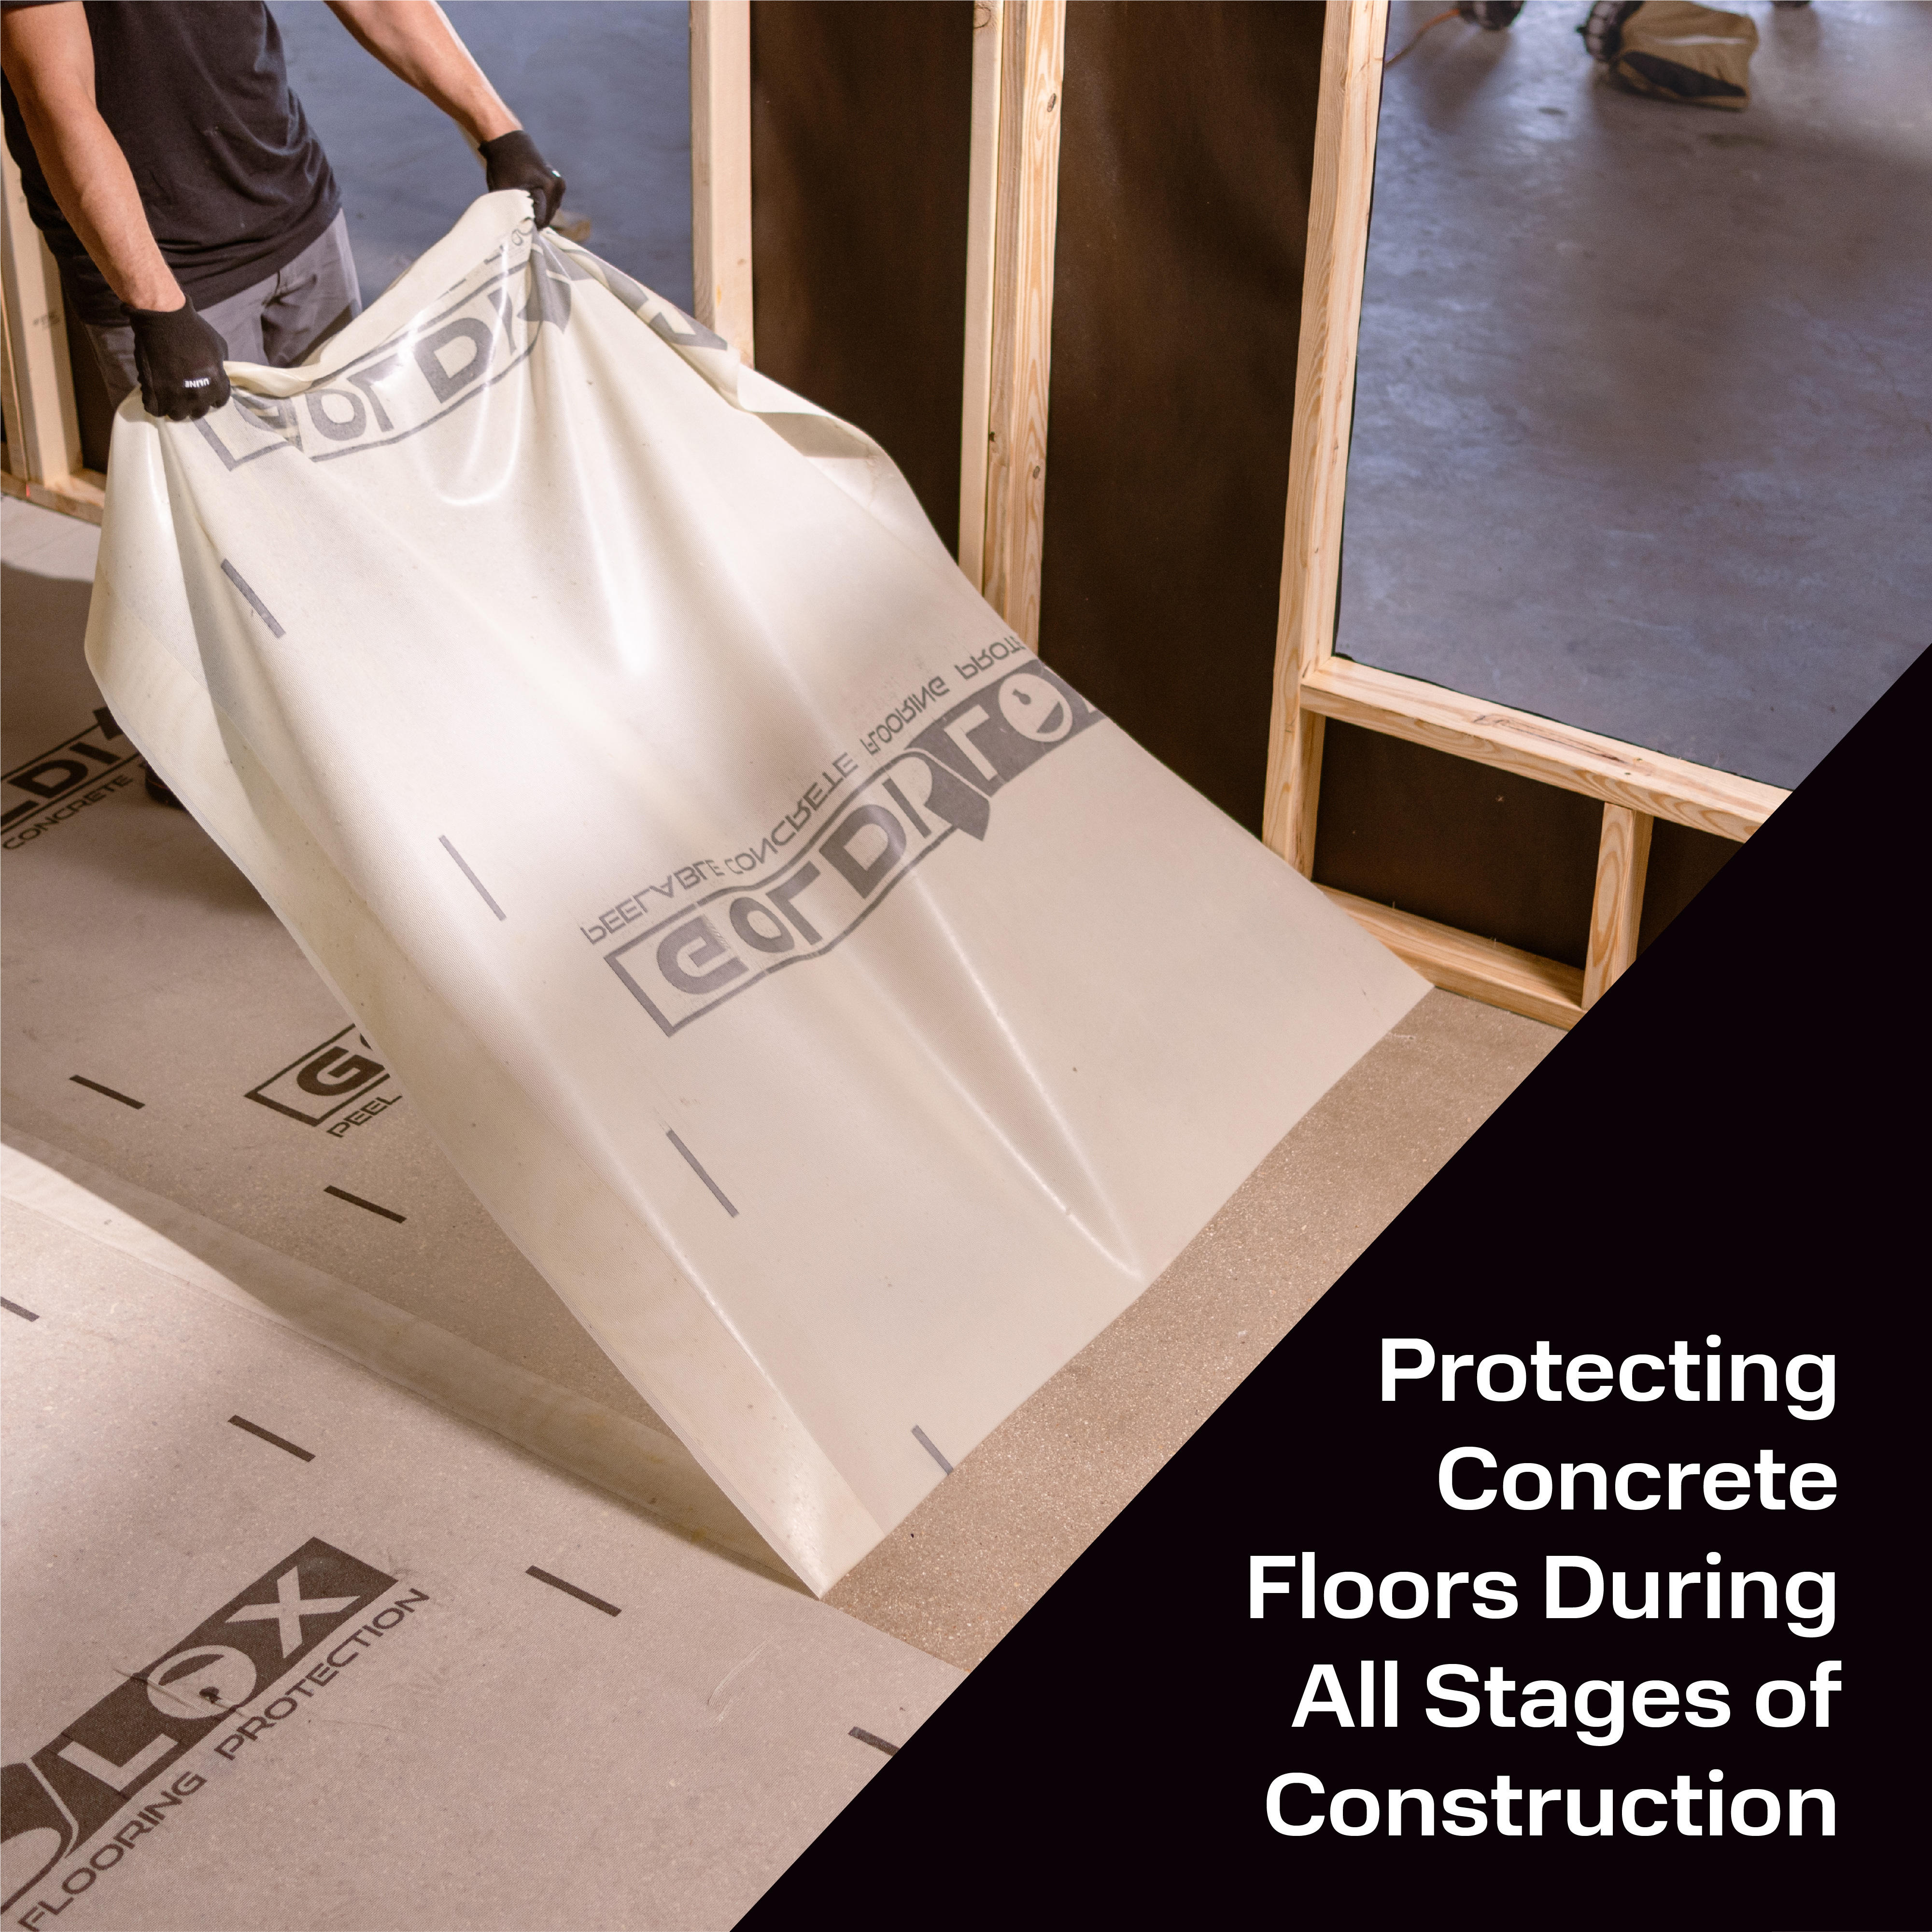 Goldilox Protects Floors During All Stages of Construction